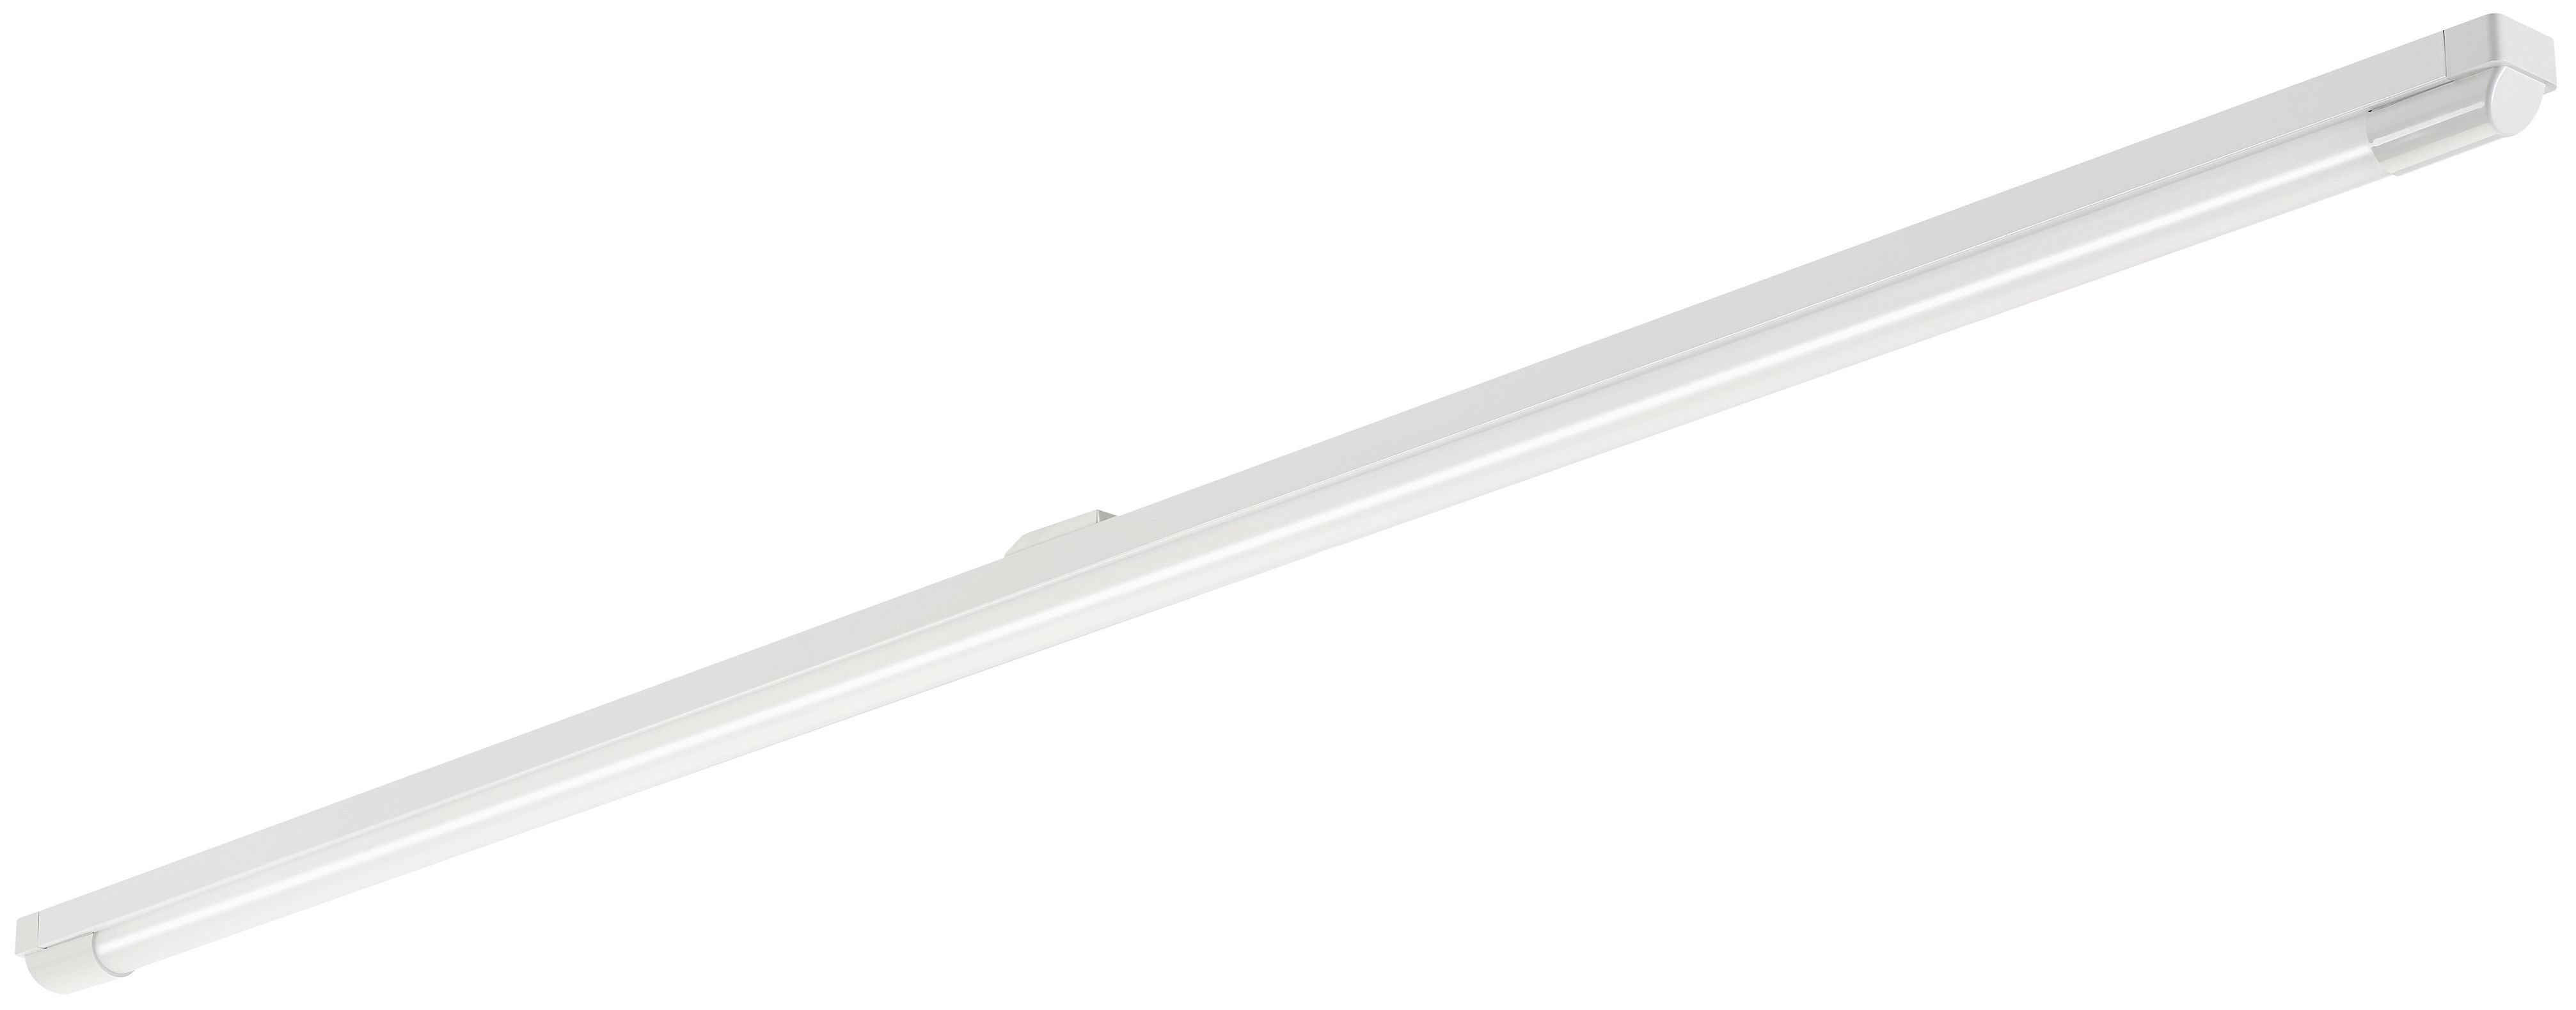 Image of Sylvania Single 5ft IP20 Light Fitting with T8 Integrated LED Tube - 18W